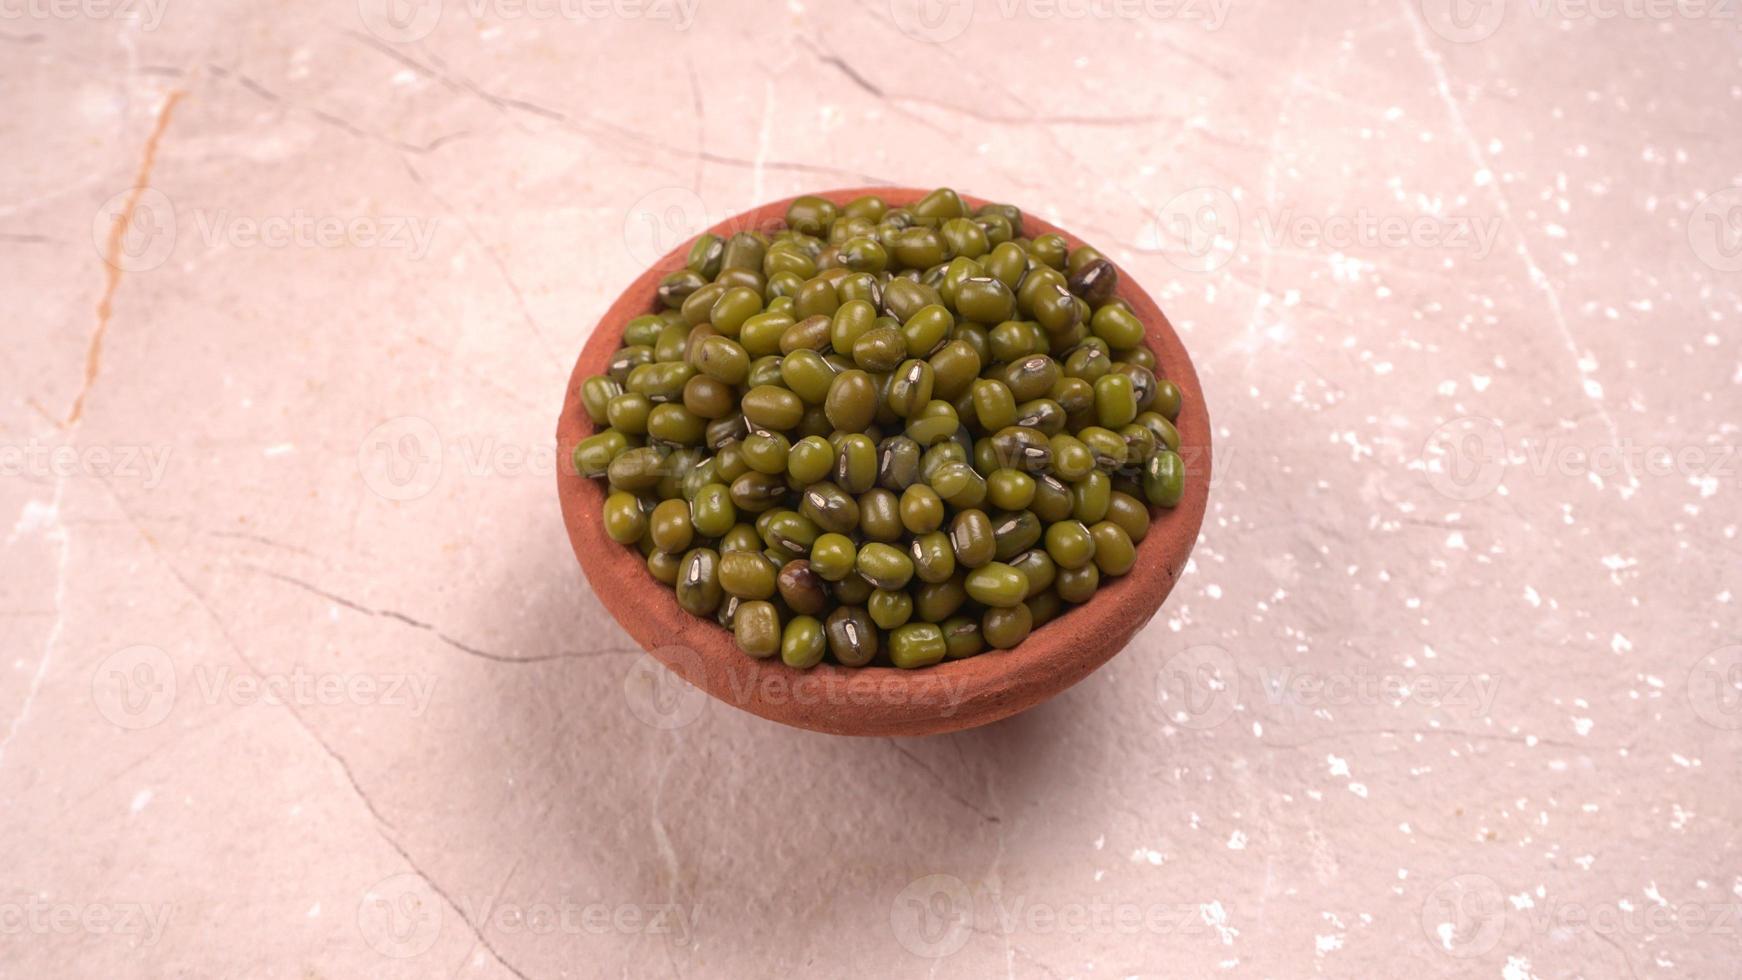 Green Mung Beans Also Know as Mung Dal, Vigna Radiata, Green Beans or Moong Dal isolated on White Background photo